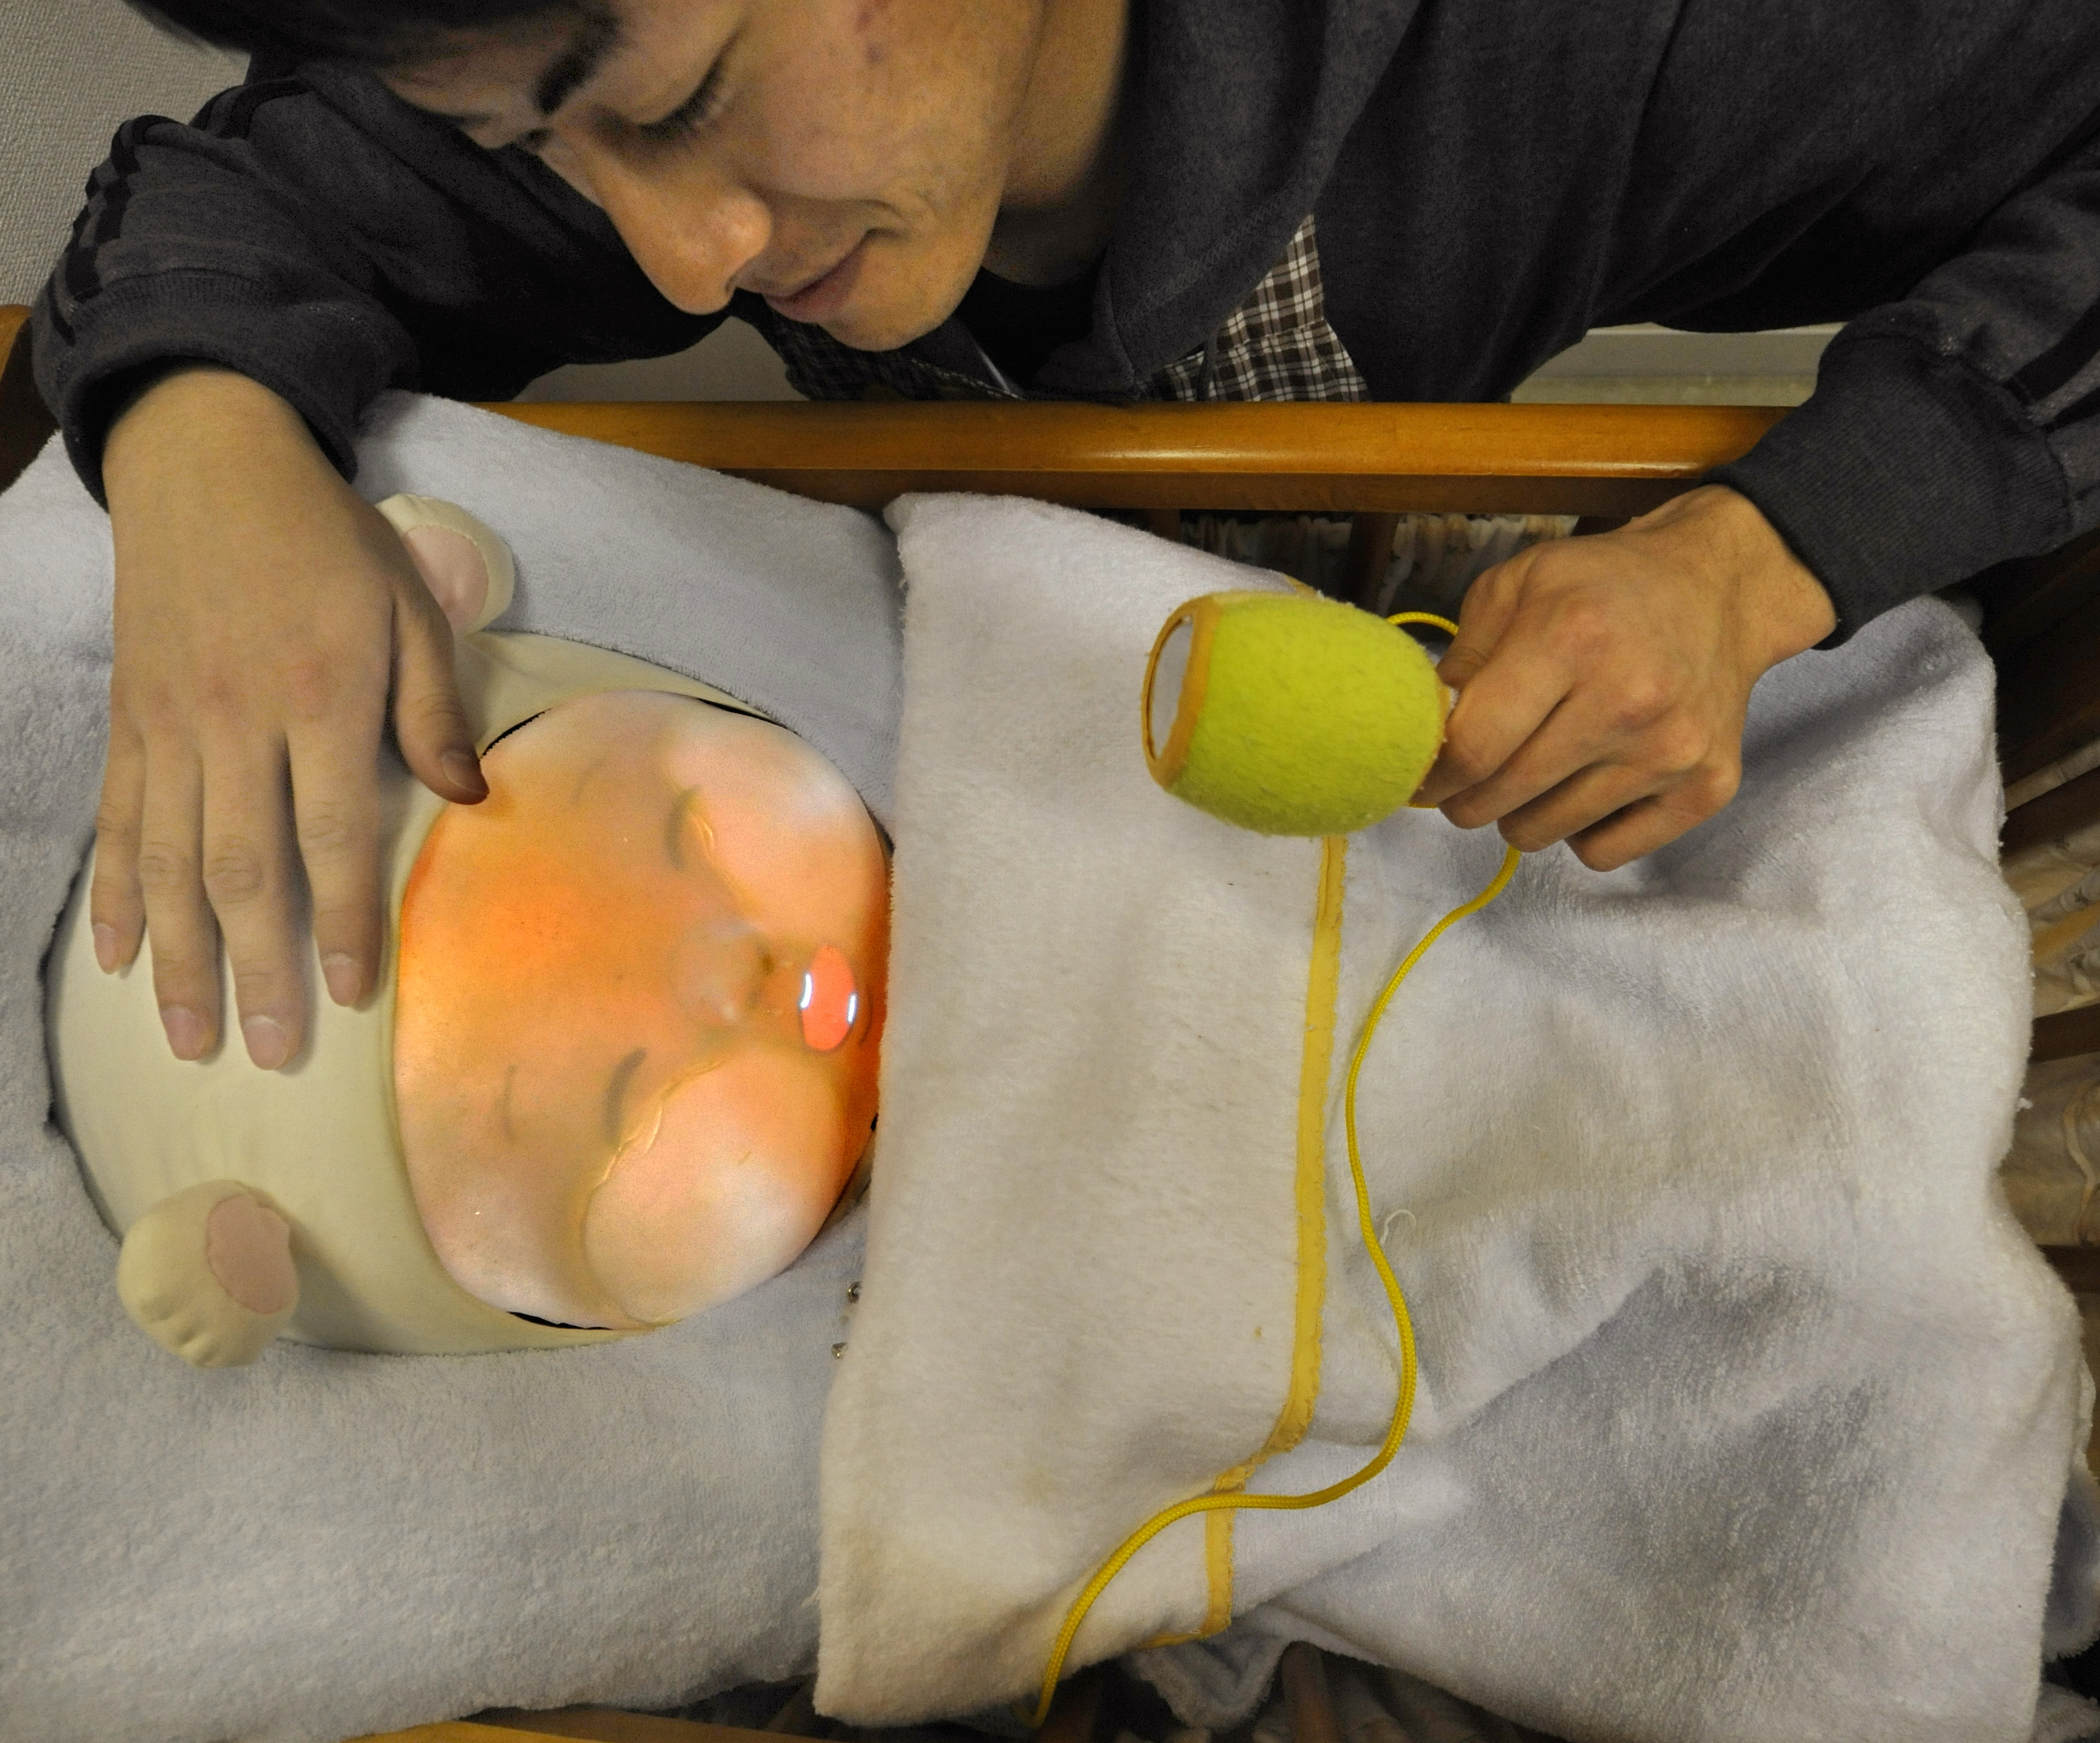 Tamura An engineering student soothes a baby robot during a presentations at a lboratory in Tsukuba University, Ibaraki Prefecture on February 12, 2010. (KAZUHIRO NOGI—AFP/Getty Images)